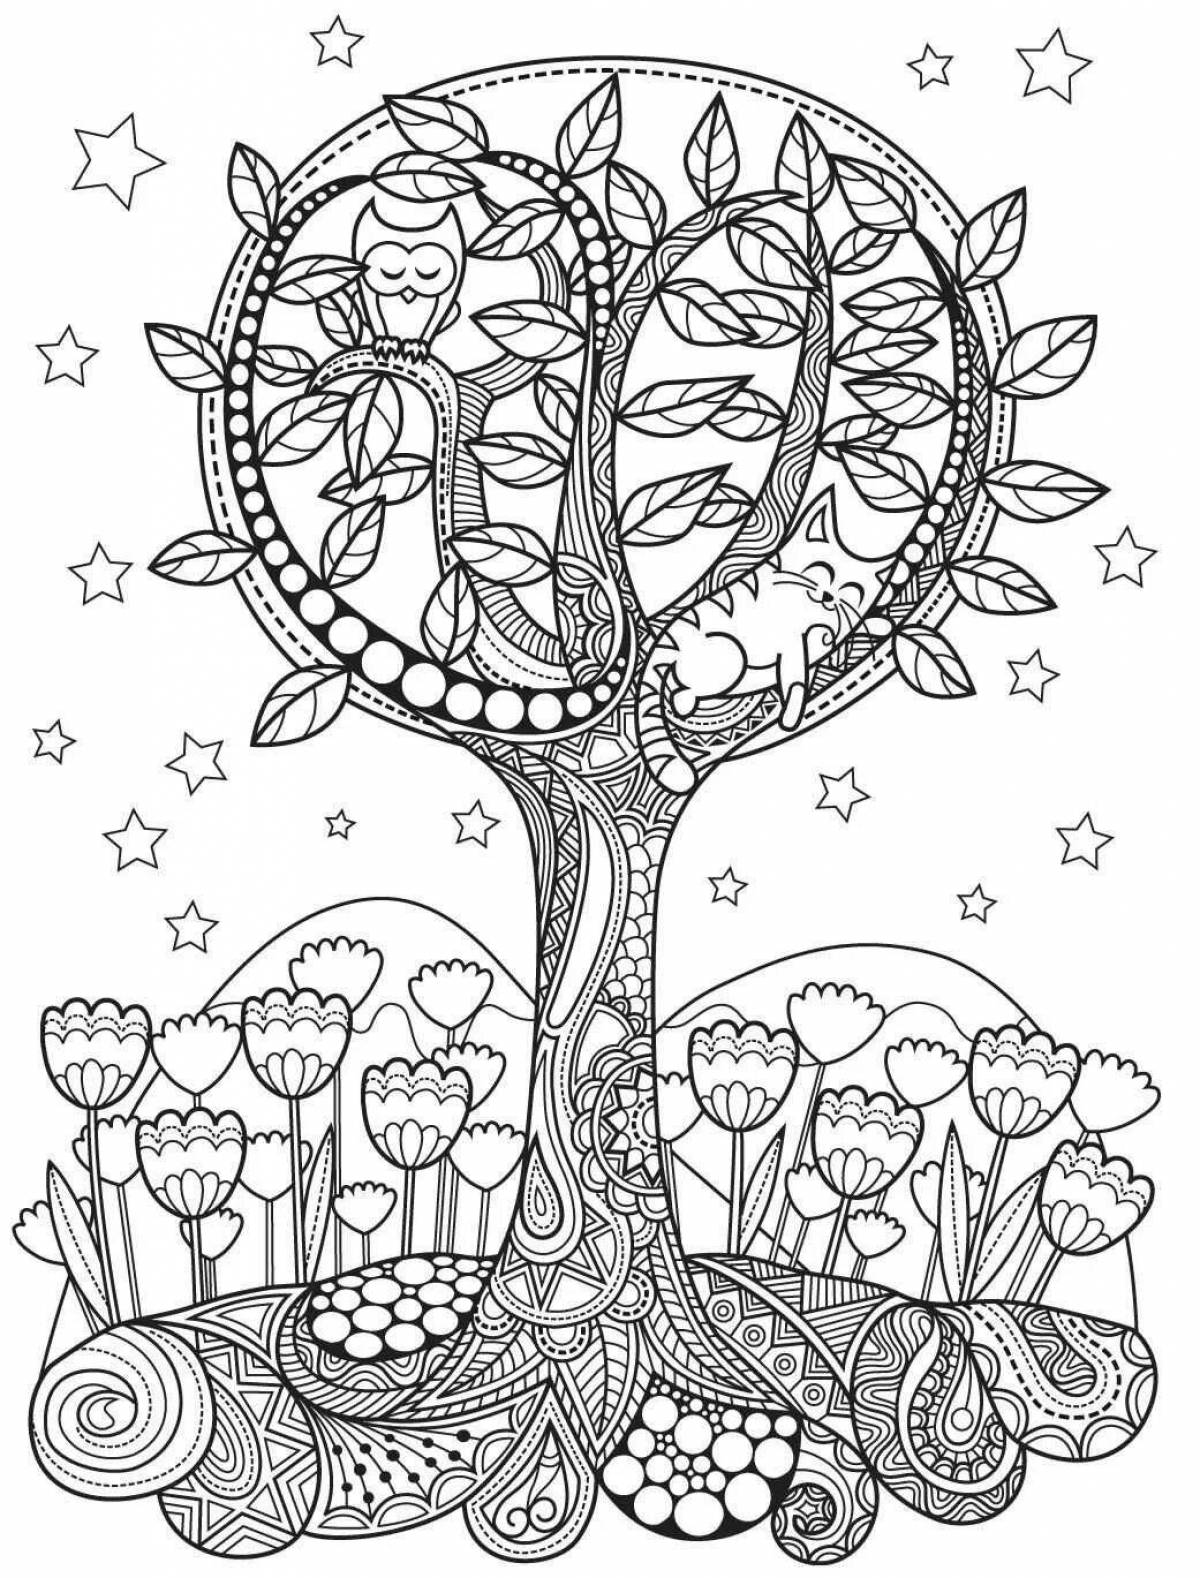 Blissful anti-stress spring coloring book